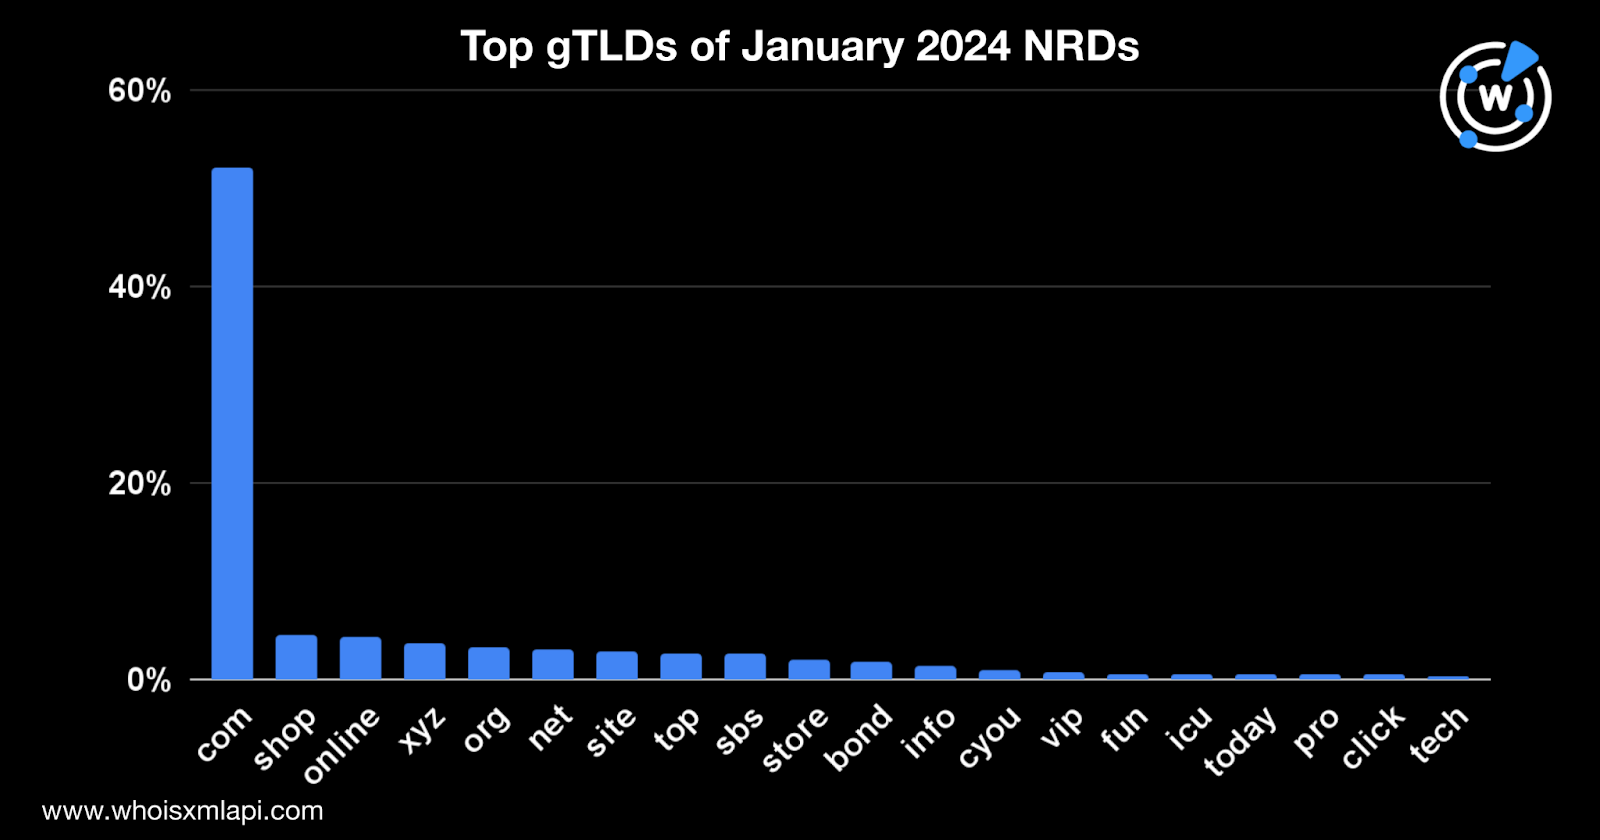 Top TLD of January 2024 NRDs